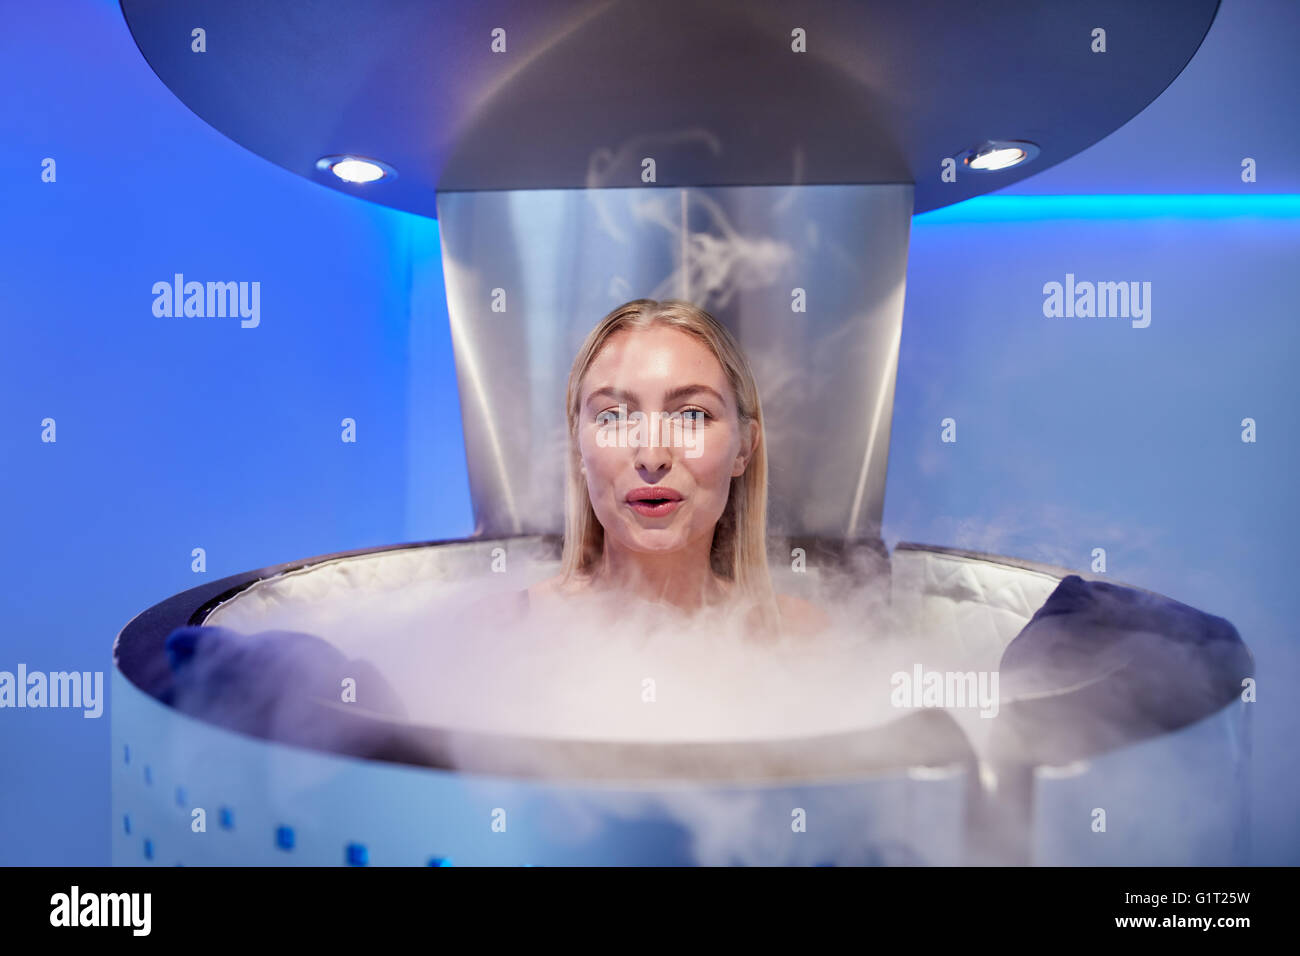 Portrait of happy young woman in a whole body cryotherapy cabin. She is looking at camera and smiling. Stock Photo